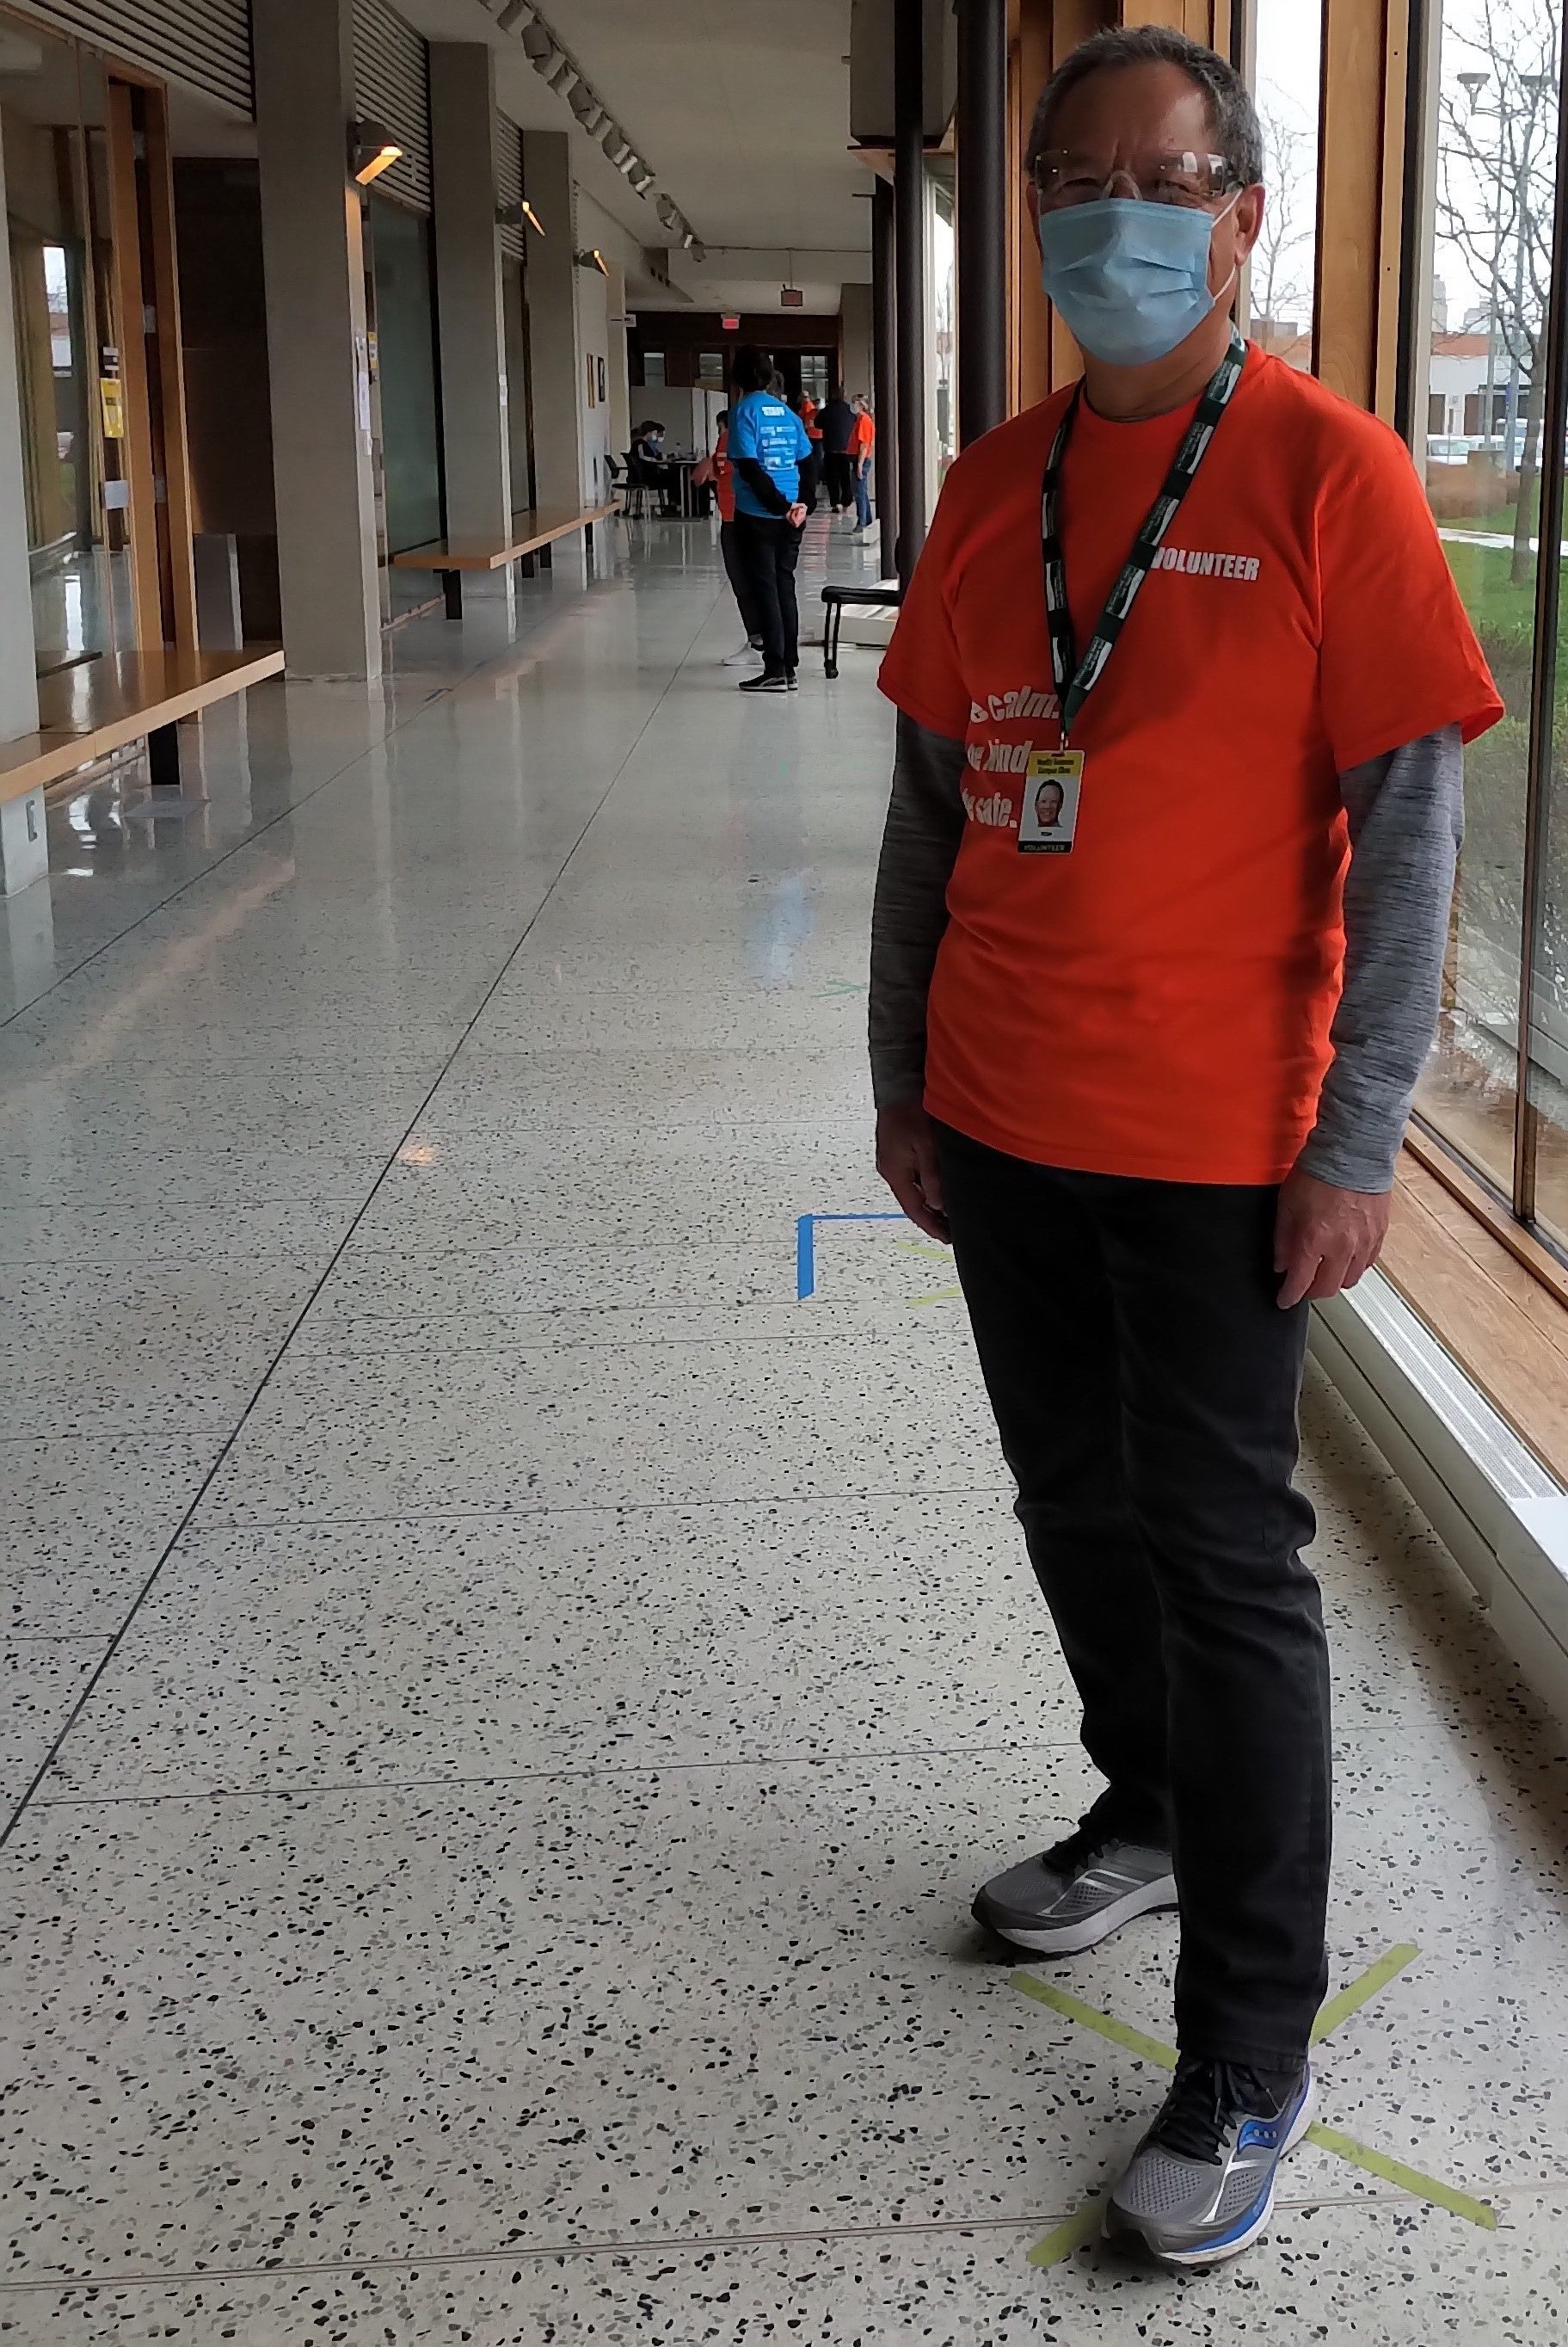 Tim wearing an orange volunteer shirt and PPE standing in the clinic